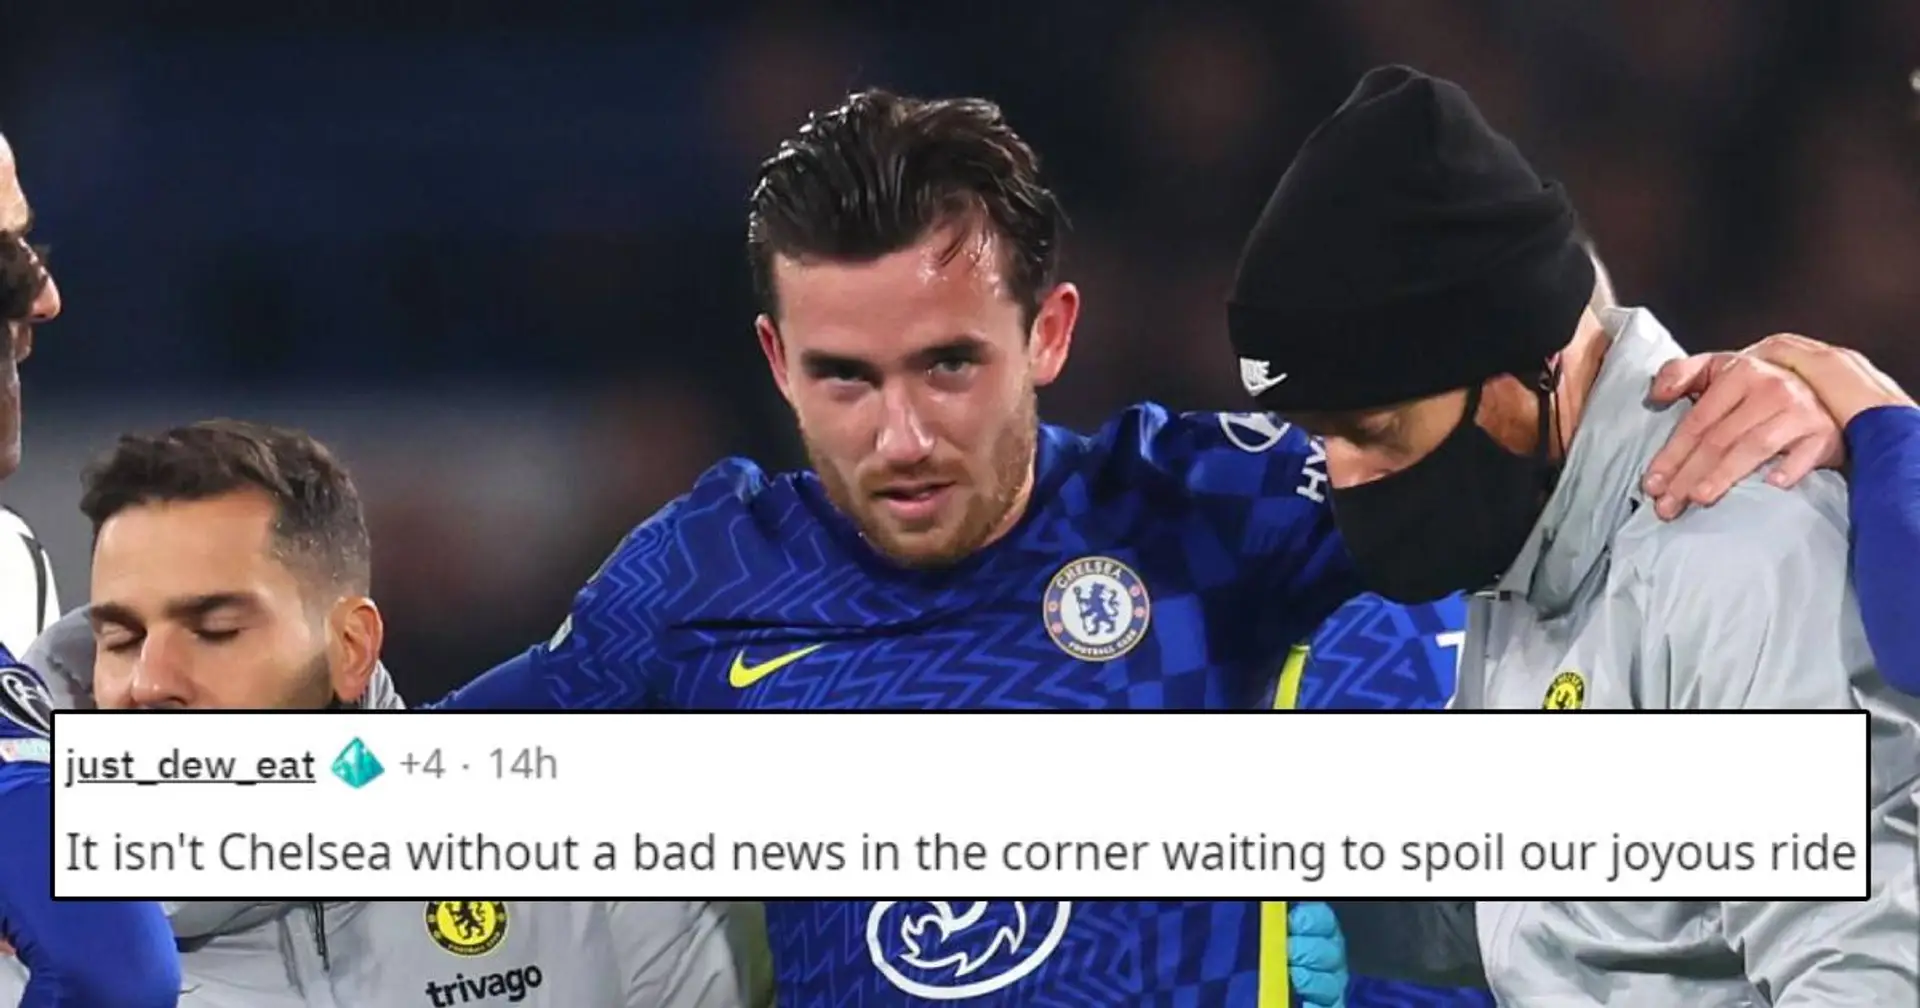 'Couldn't have happened at a worse time': Fans react to Chilwell's injury news as Chelsea fear ACL damage